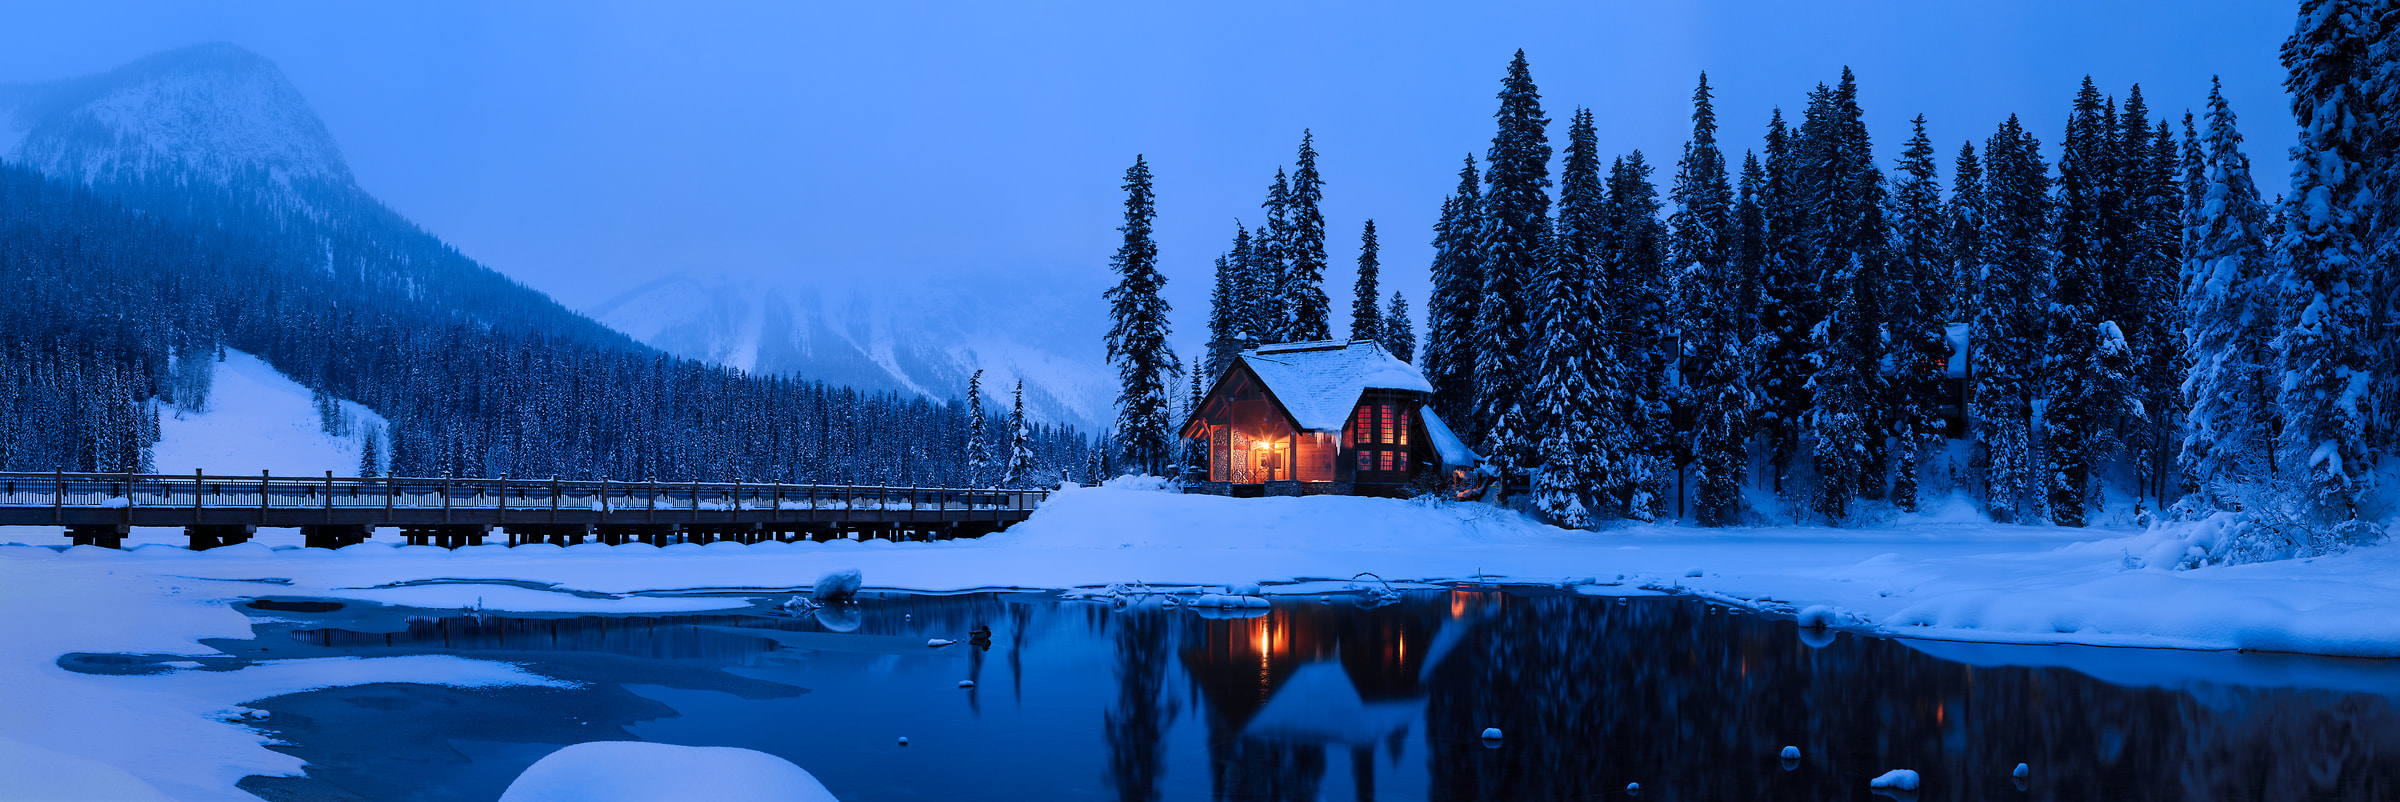 690 megapixels! A very high resolution, large-format VAST photo of a cozy winter scene with a snow covered forest, icy lake, a warm ski cabin in the woods, and snowy mountains; large-format photo print created at twilight by Scott Dimond in Yoho National Park, British Columbia, Canada